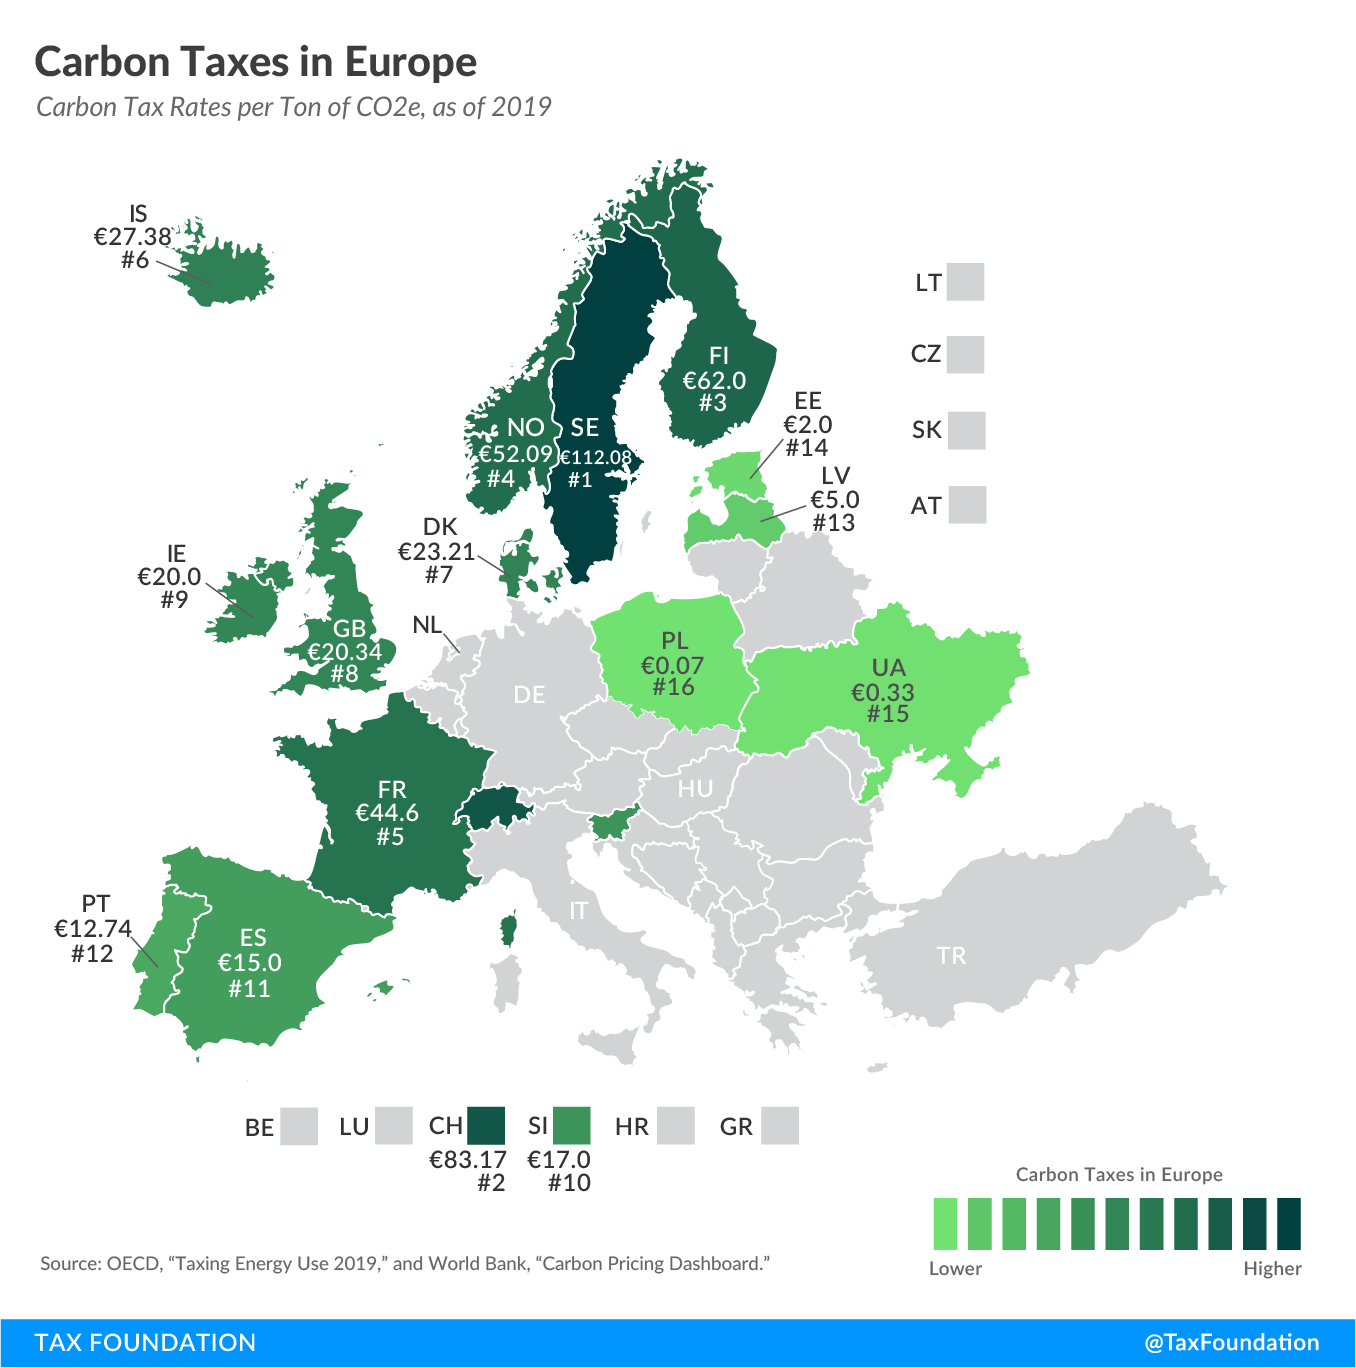 How do carbon taxes compare in Europe?